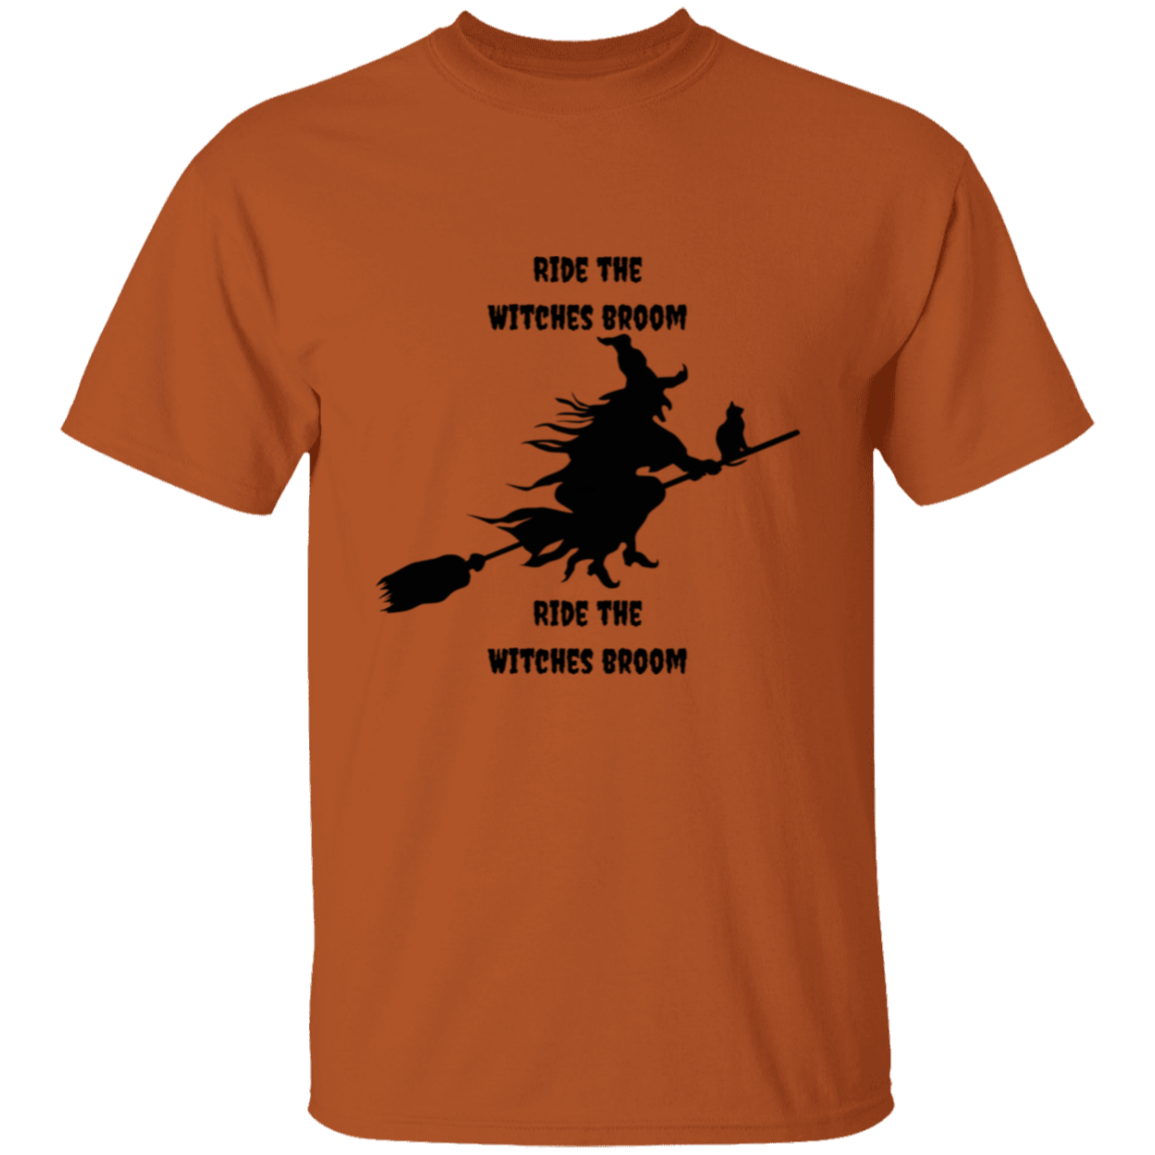 Ride the witches broom (19) G500 5.3 oz. T-Shirt